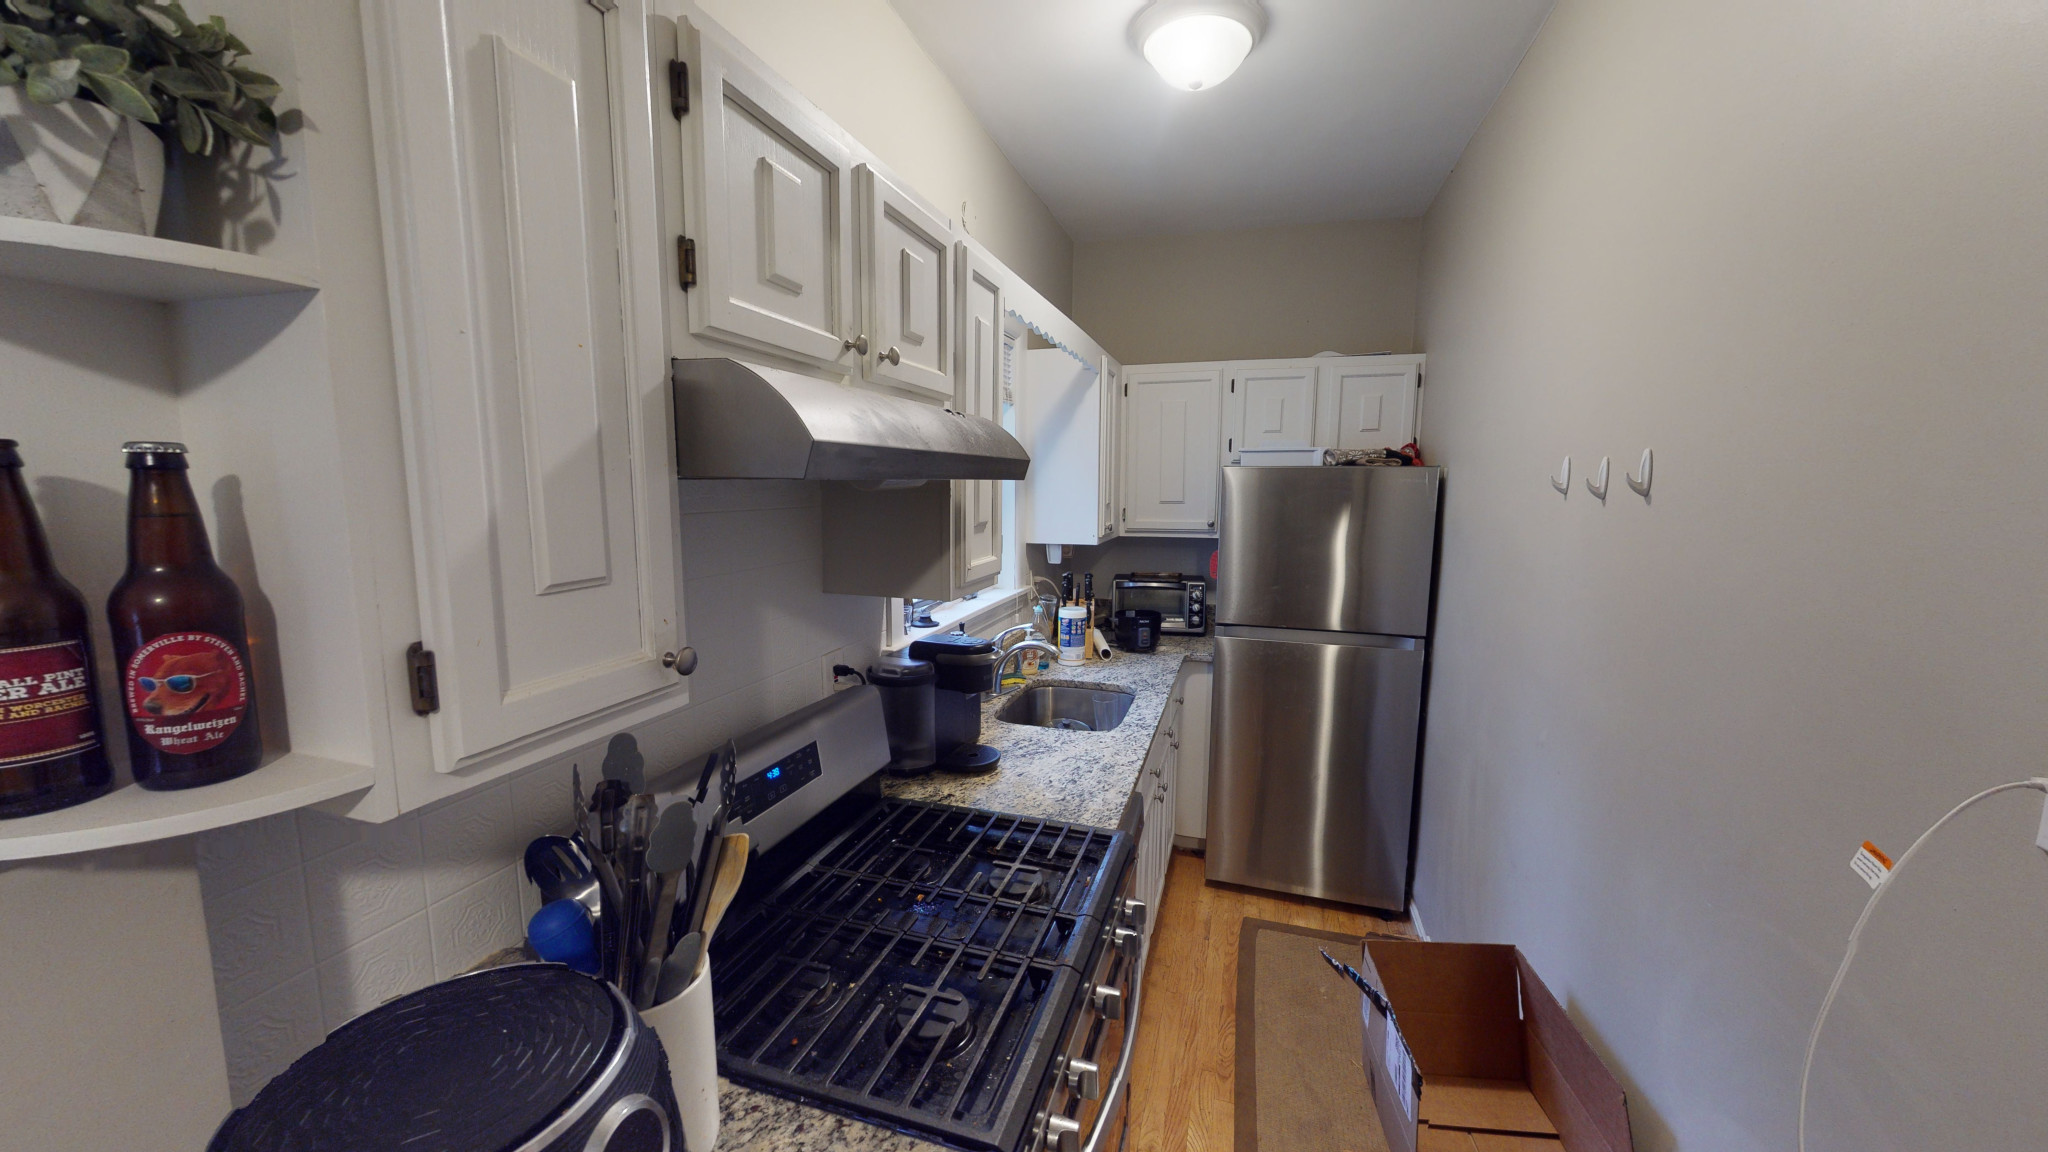 Photos of apartment on Rogers Ave.,Somerville MA 02144